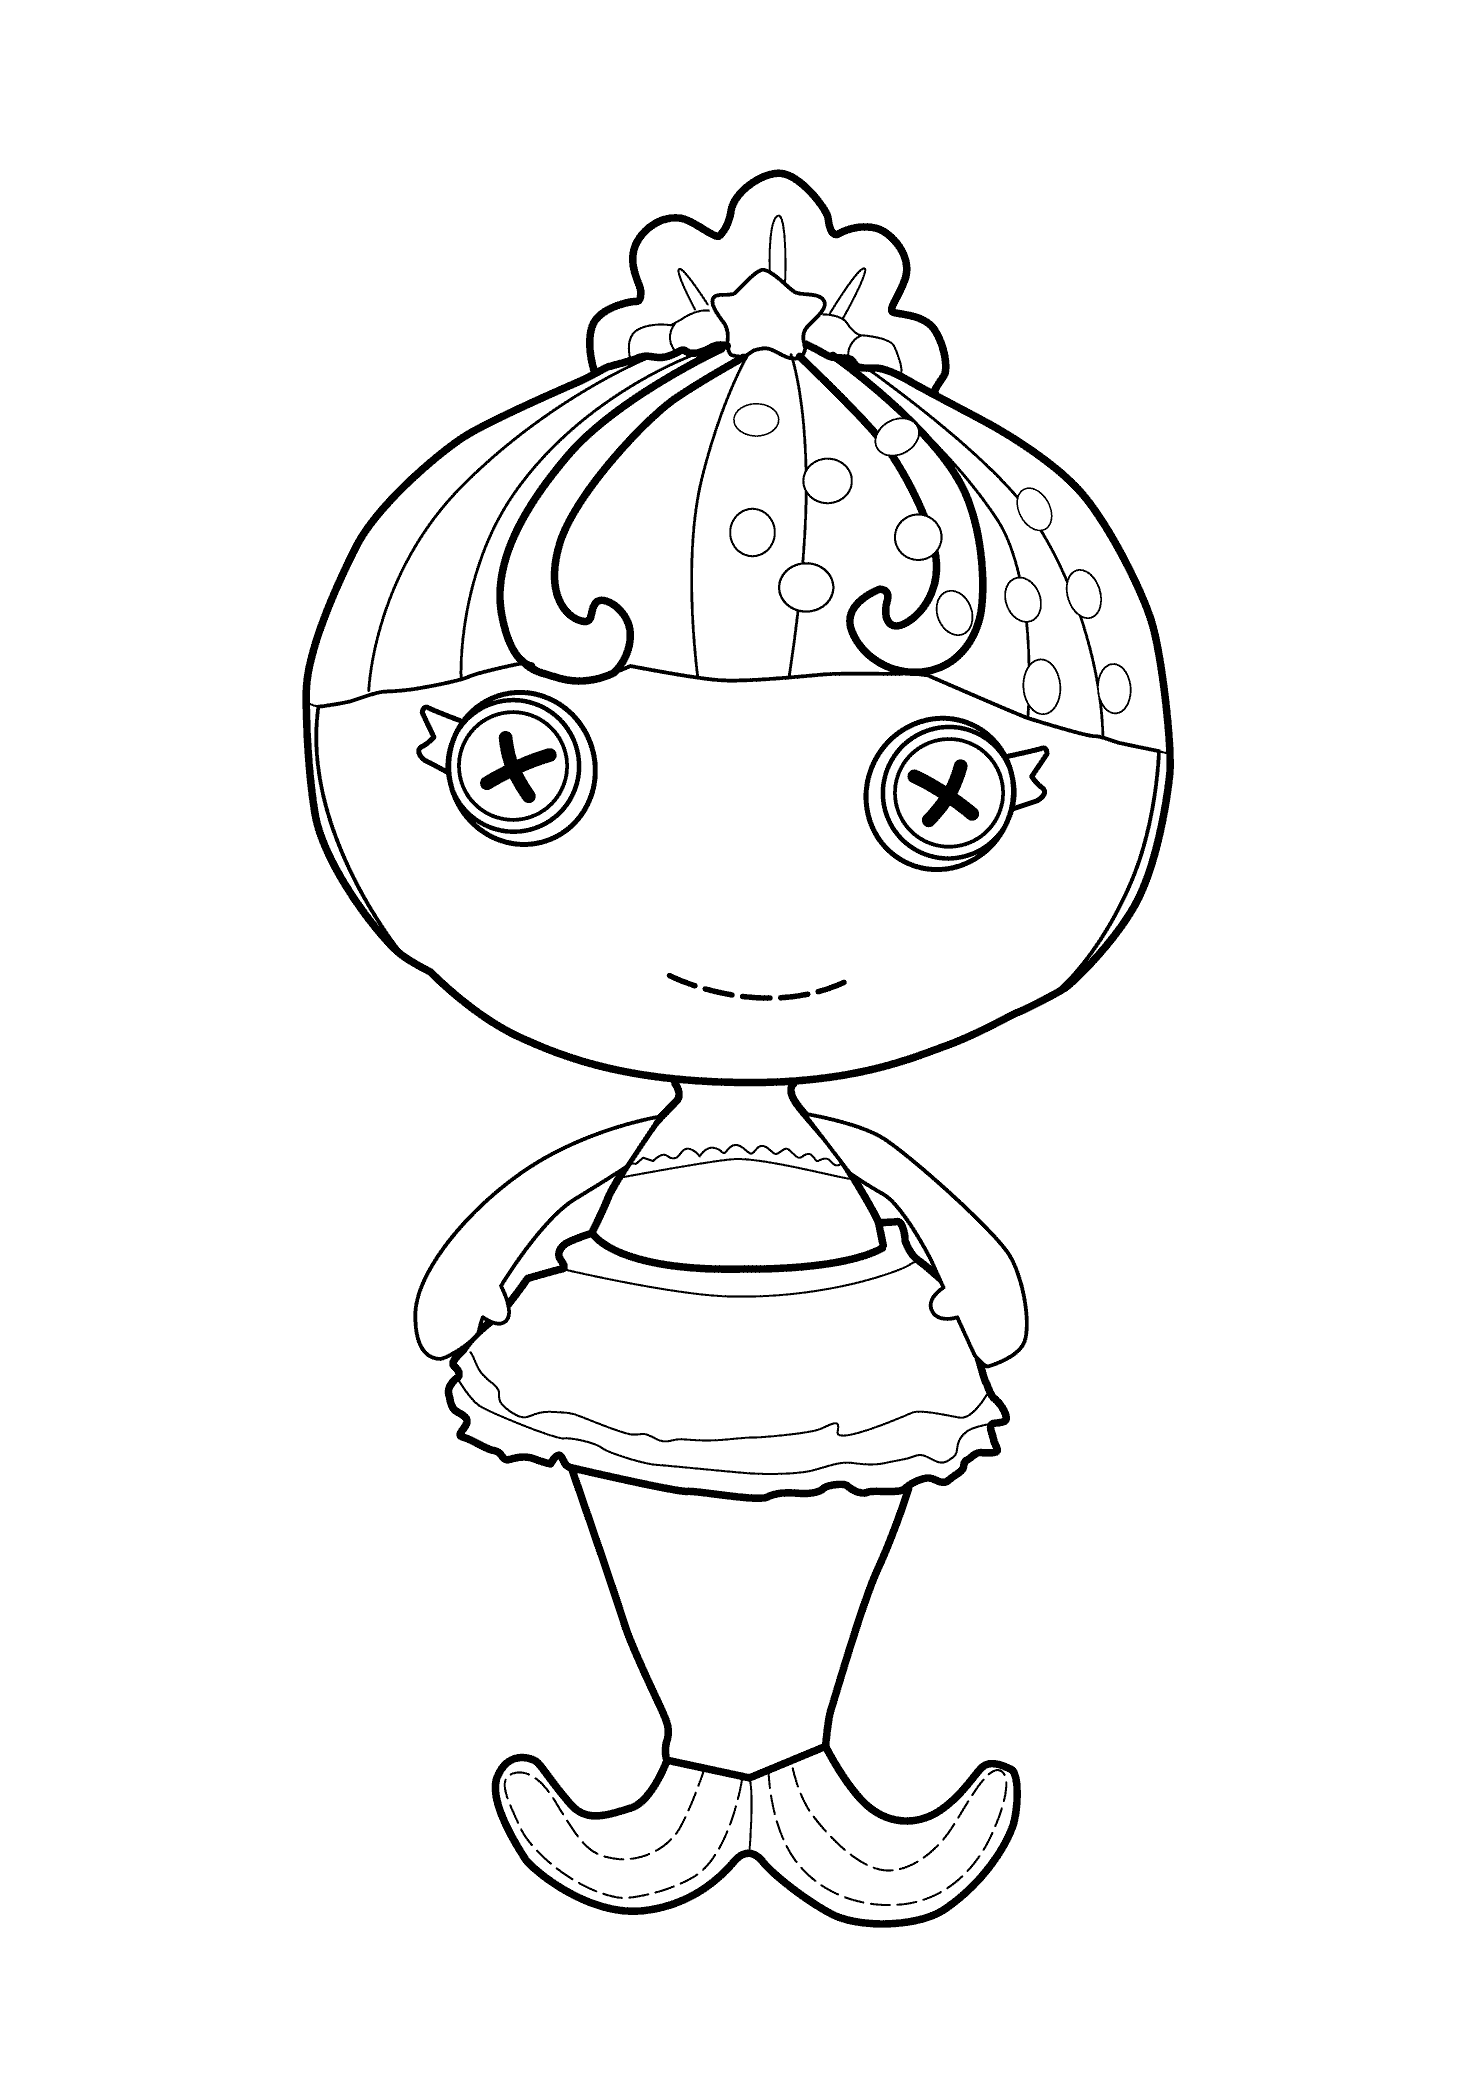 a coloring sheet hairstyle coloring pages to download and print for free sheet a coloring 